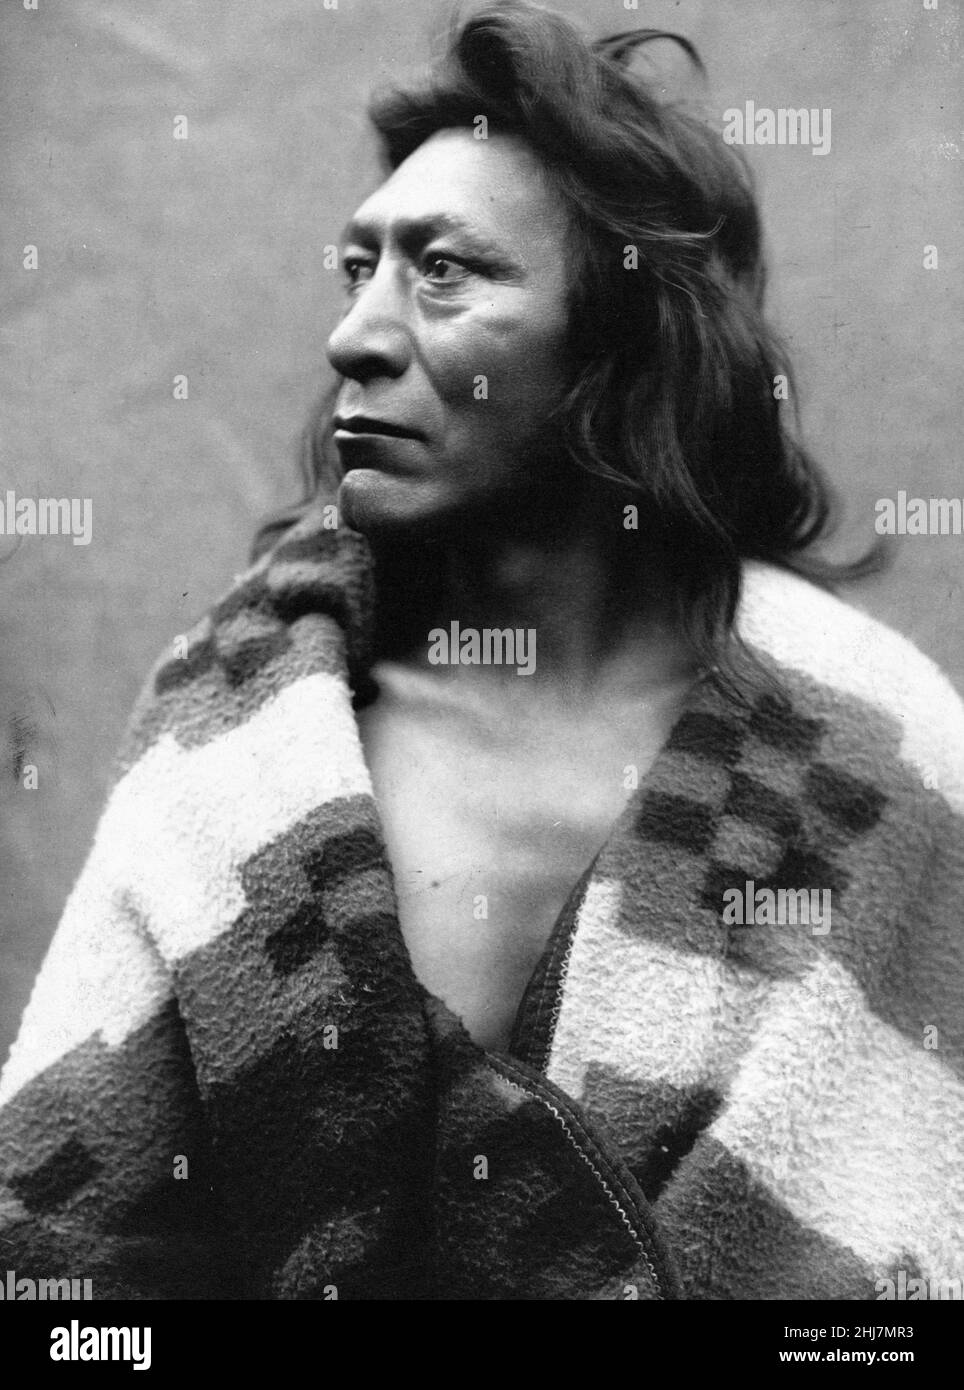 Fish Hawk - Antique and vintage photo - Native american / Indian / American Indian. Moorhouse, Lee, 1850-1926, photographer. Stock Photo